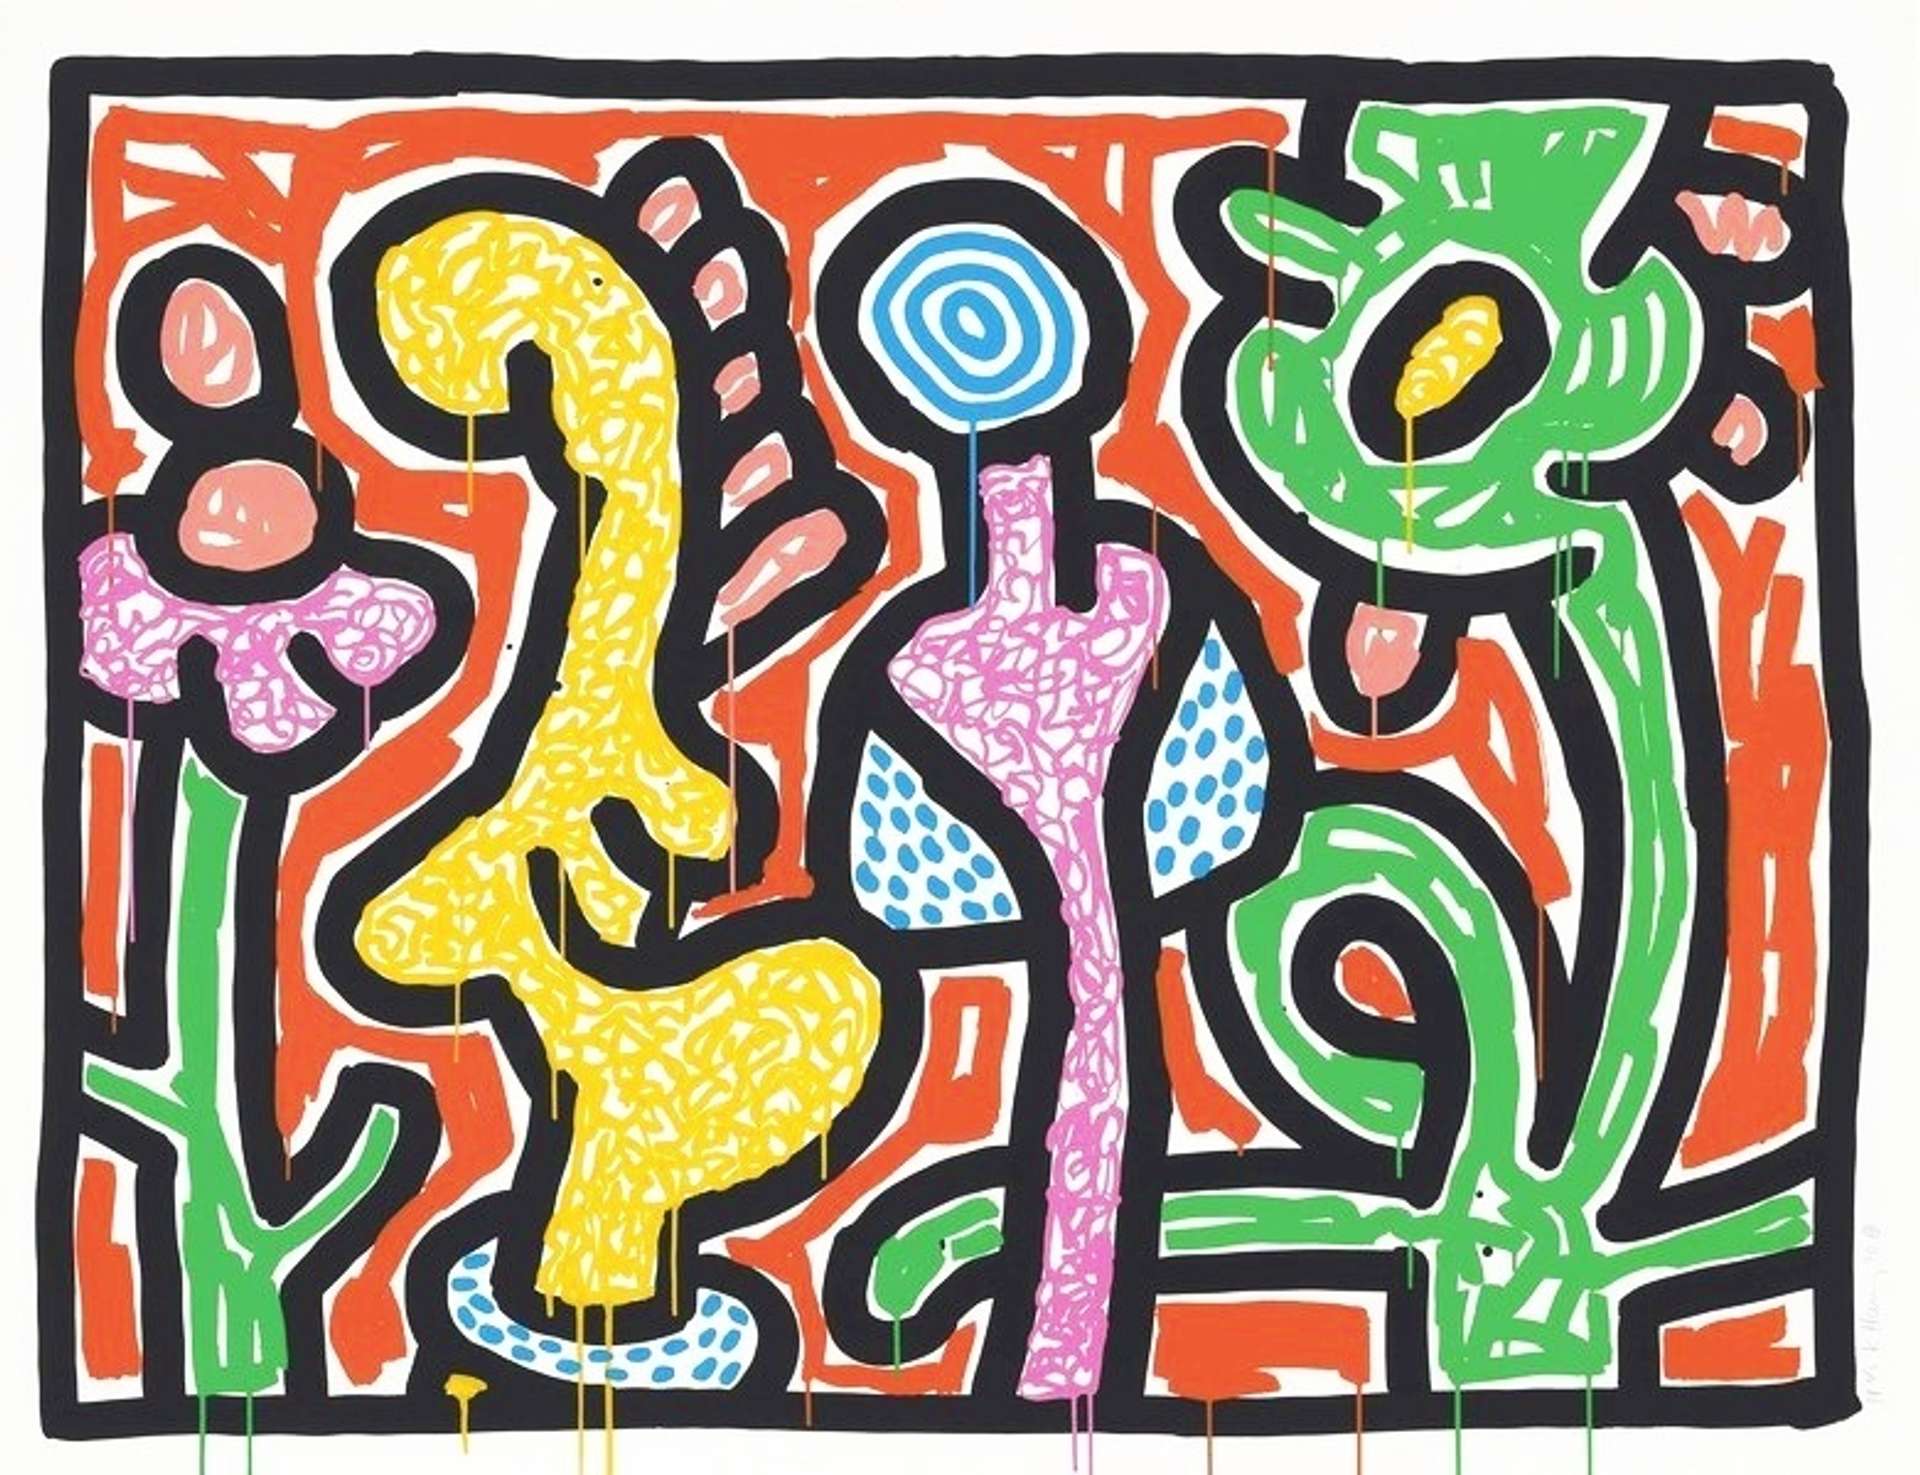 Flowers IV by Keith Haring